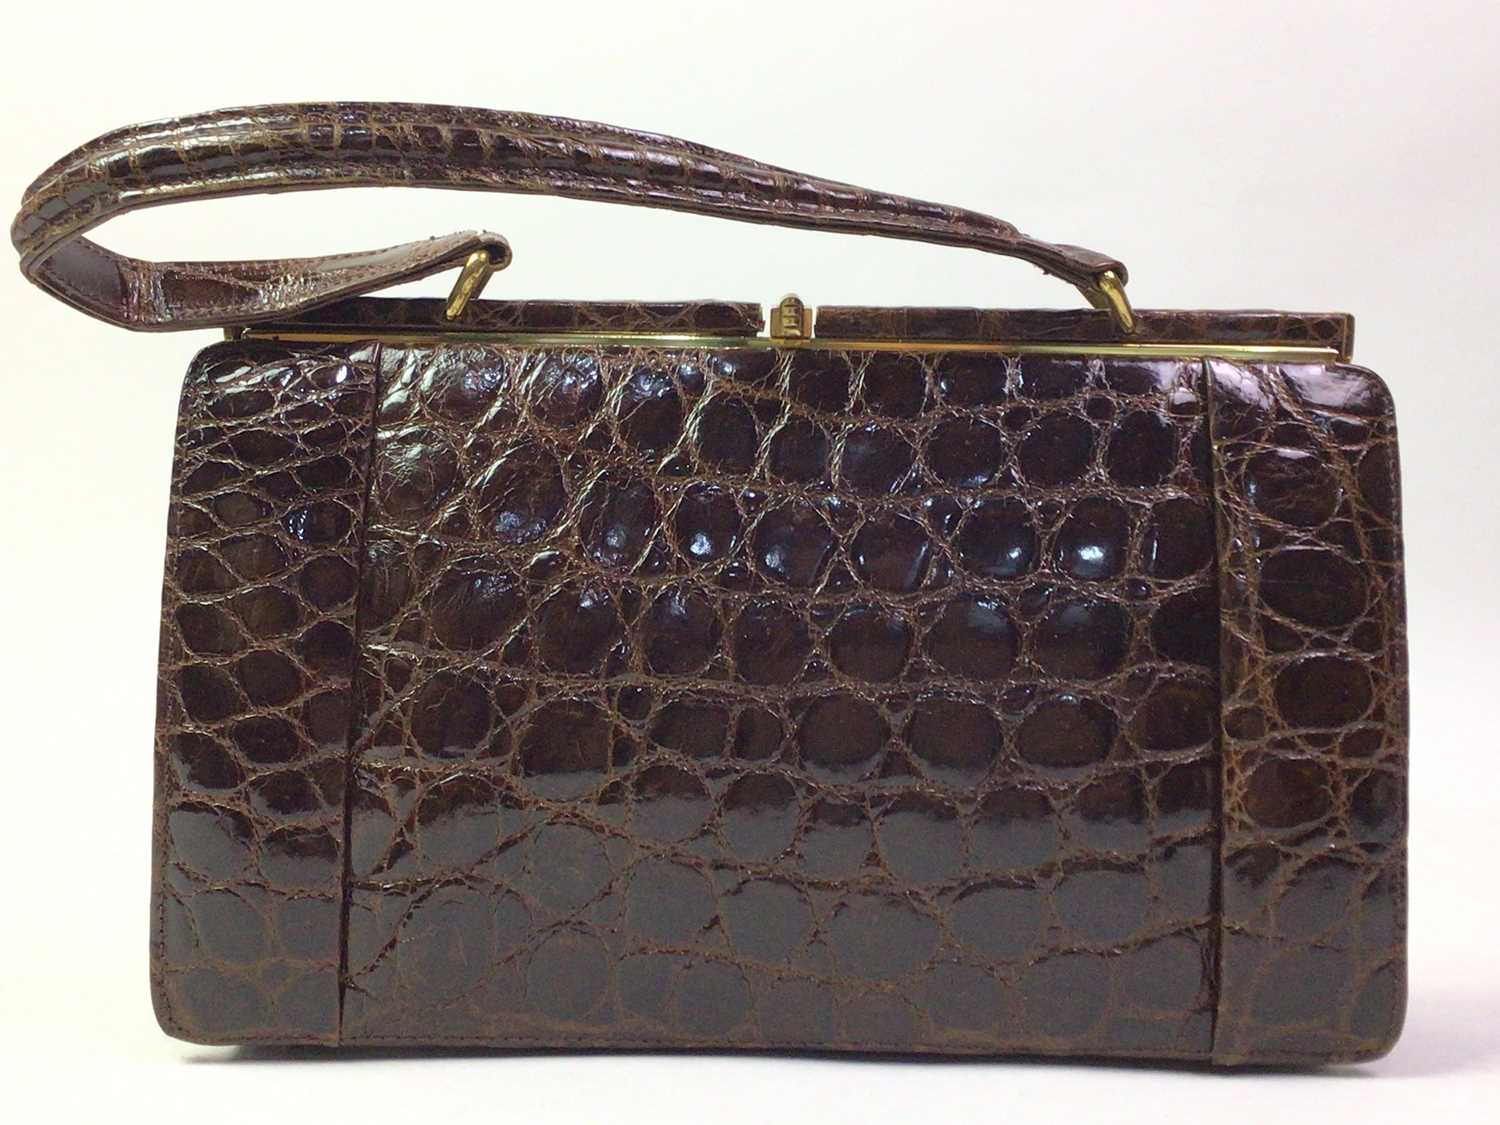 Lot 104 - COLLECTION OF VINTAGE HANDBAGS AND PURSES